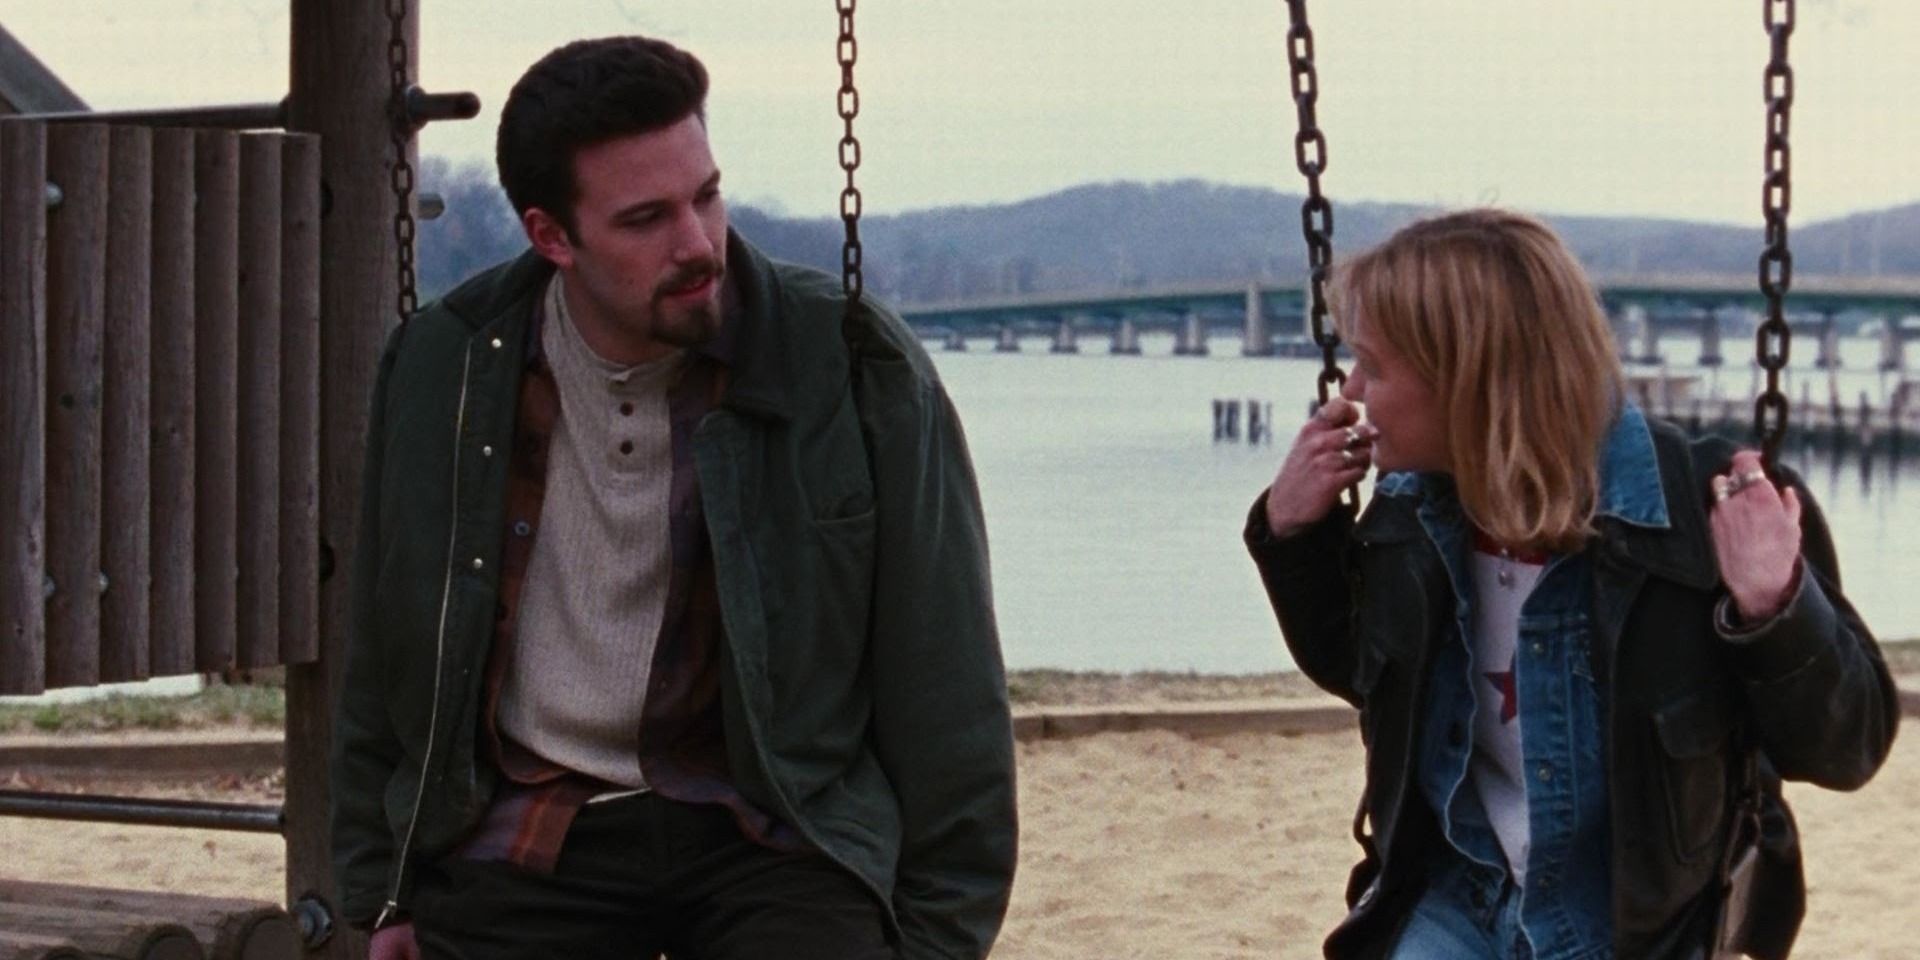 Holden and a girl talking while sitting on swings in Chasing Amy.